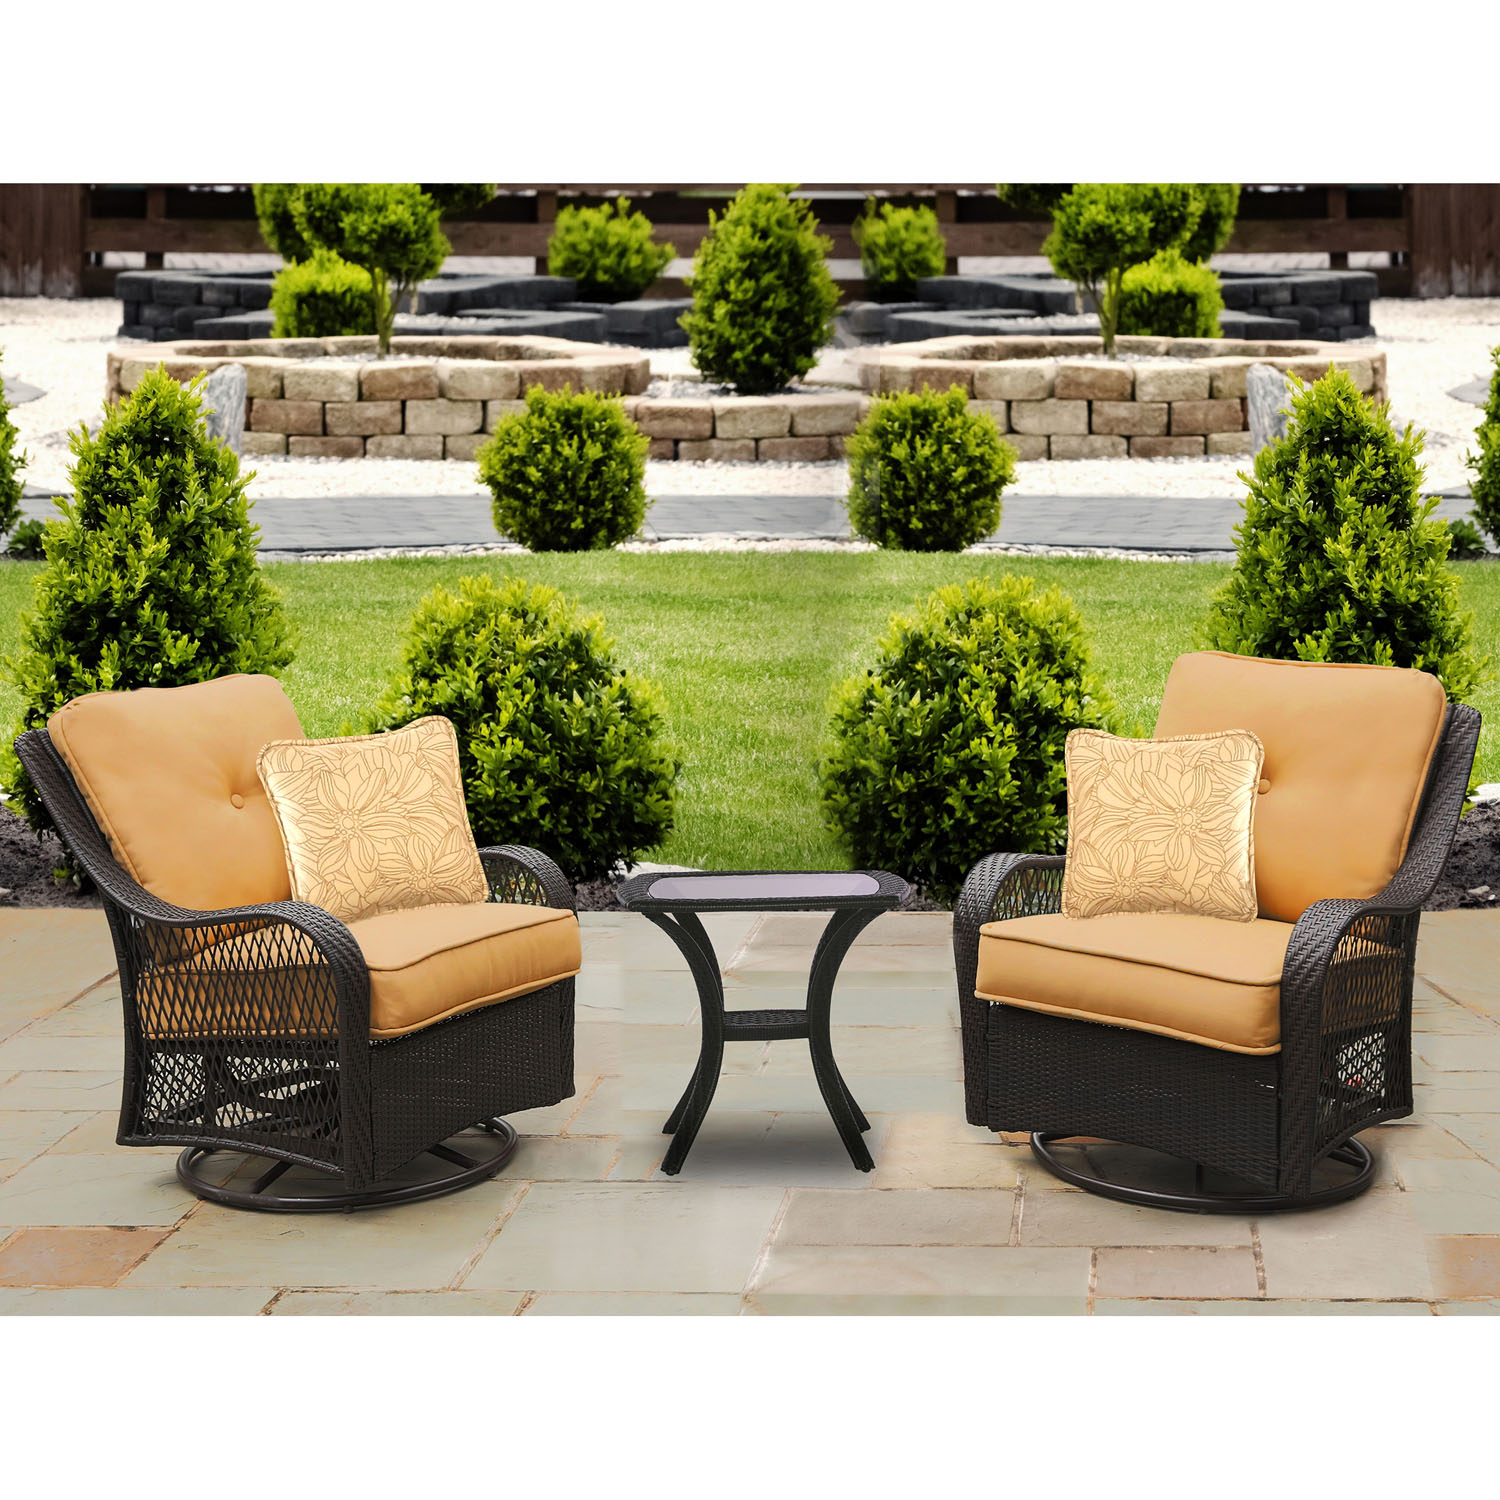 Hanover Orleans 3-Piece Outdoor Swivel Rocking Chat Set - image 1 of 6